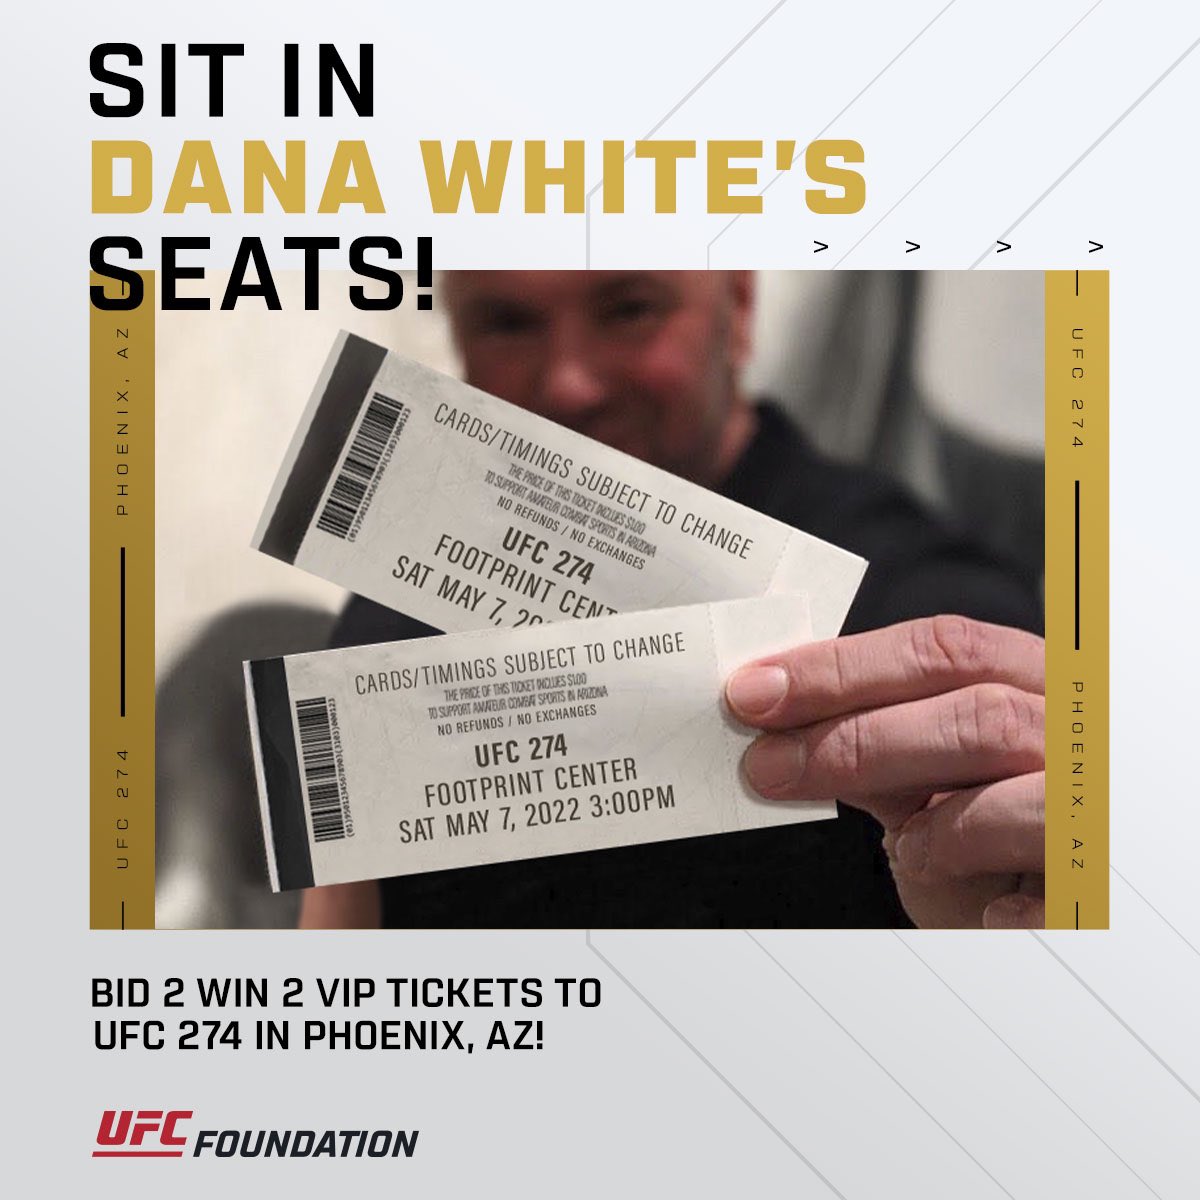 Ufc Rt Danawhite Bid To Win 2 Vip Tickets To Sit In My Personal Section For Ufc274 Oliveira Vs Gaethje Net Proceeds Benefit Ufcfoundation Twitter